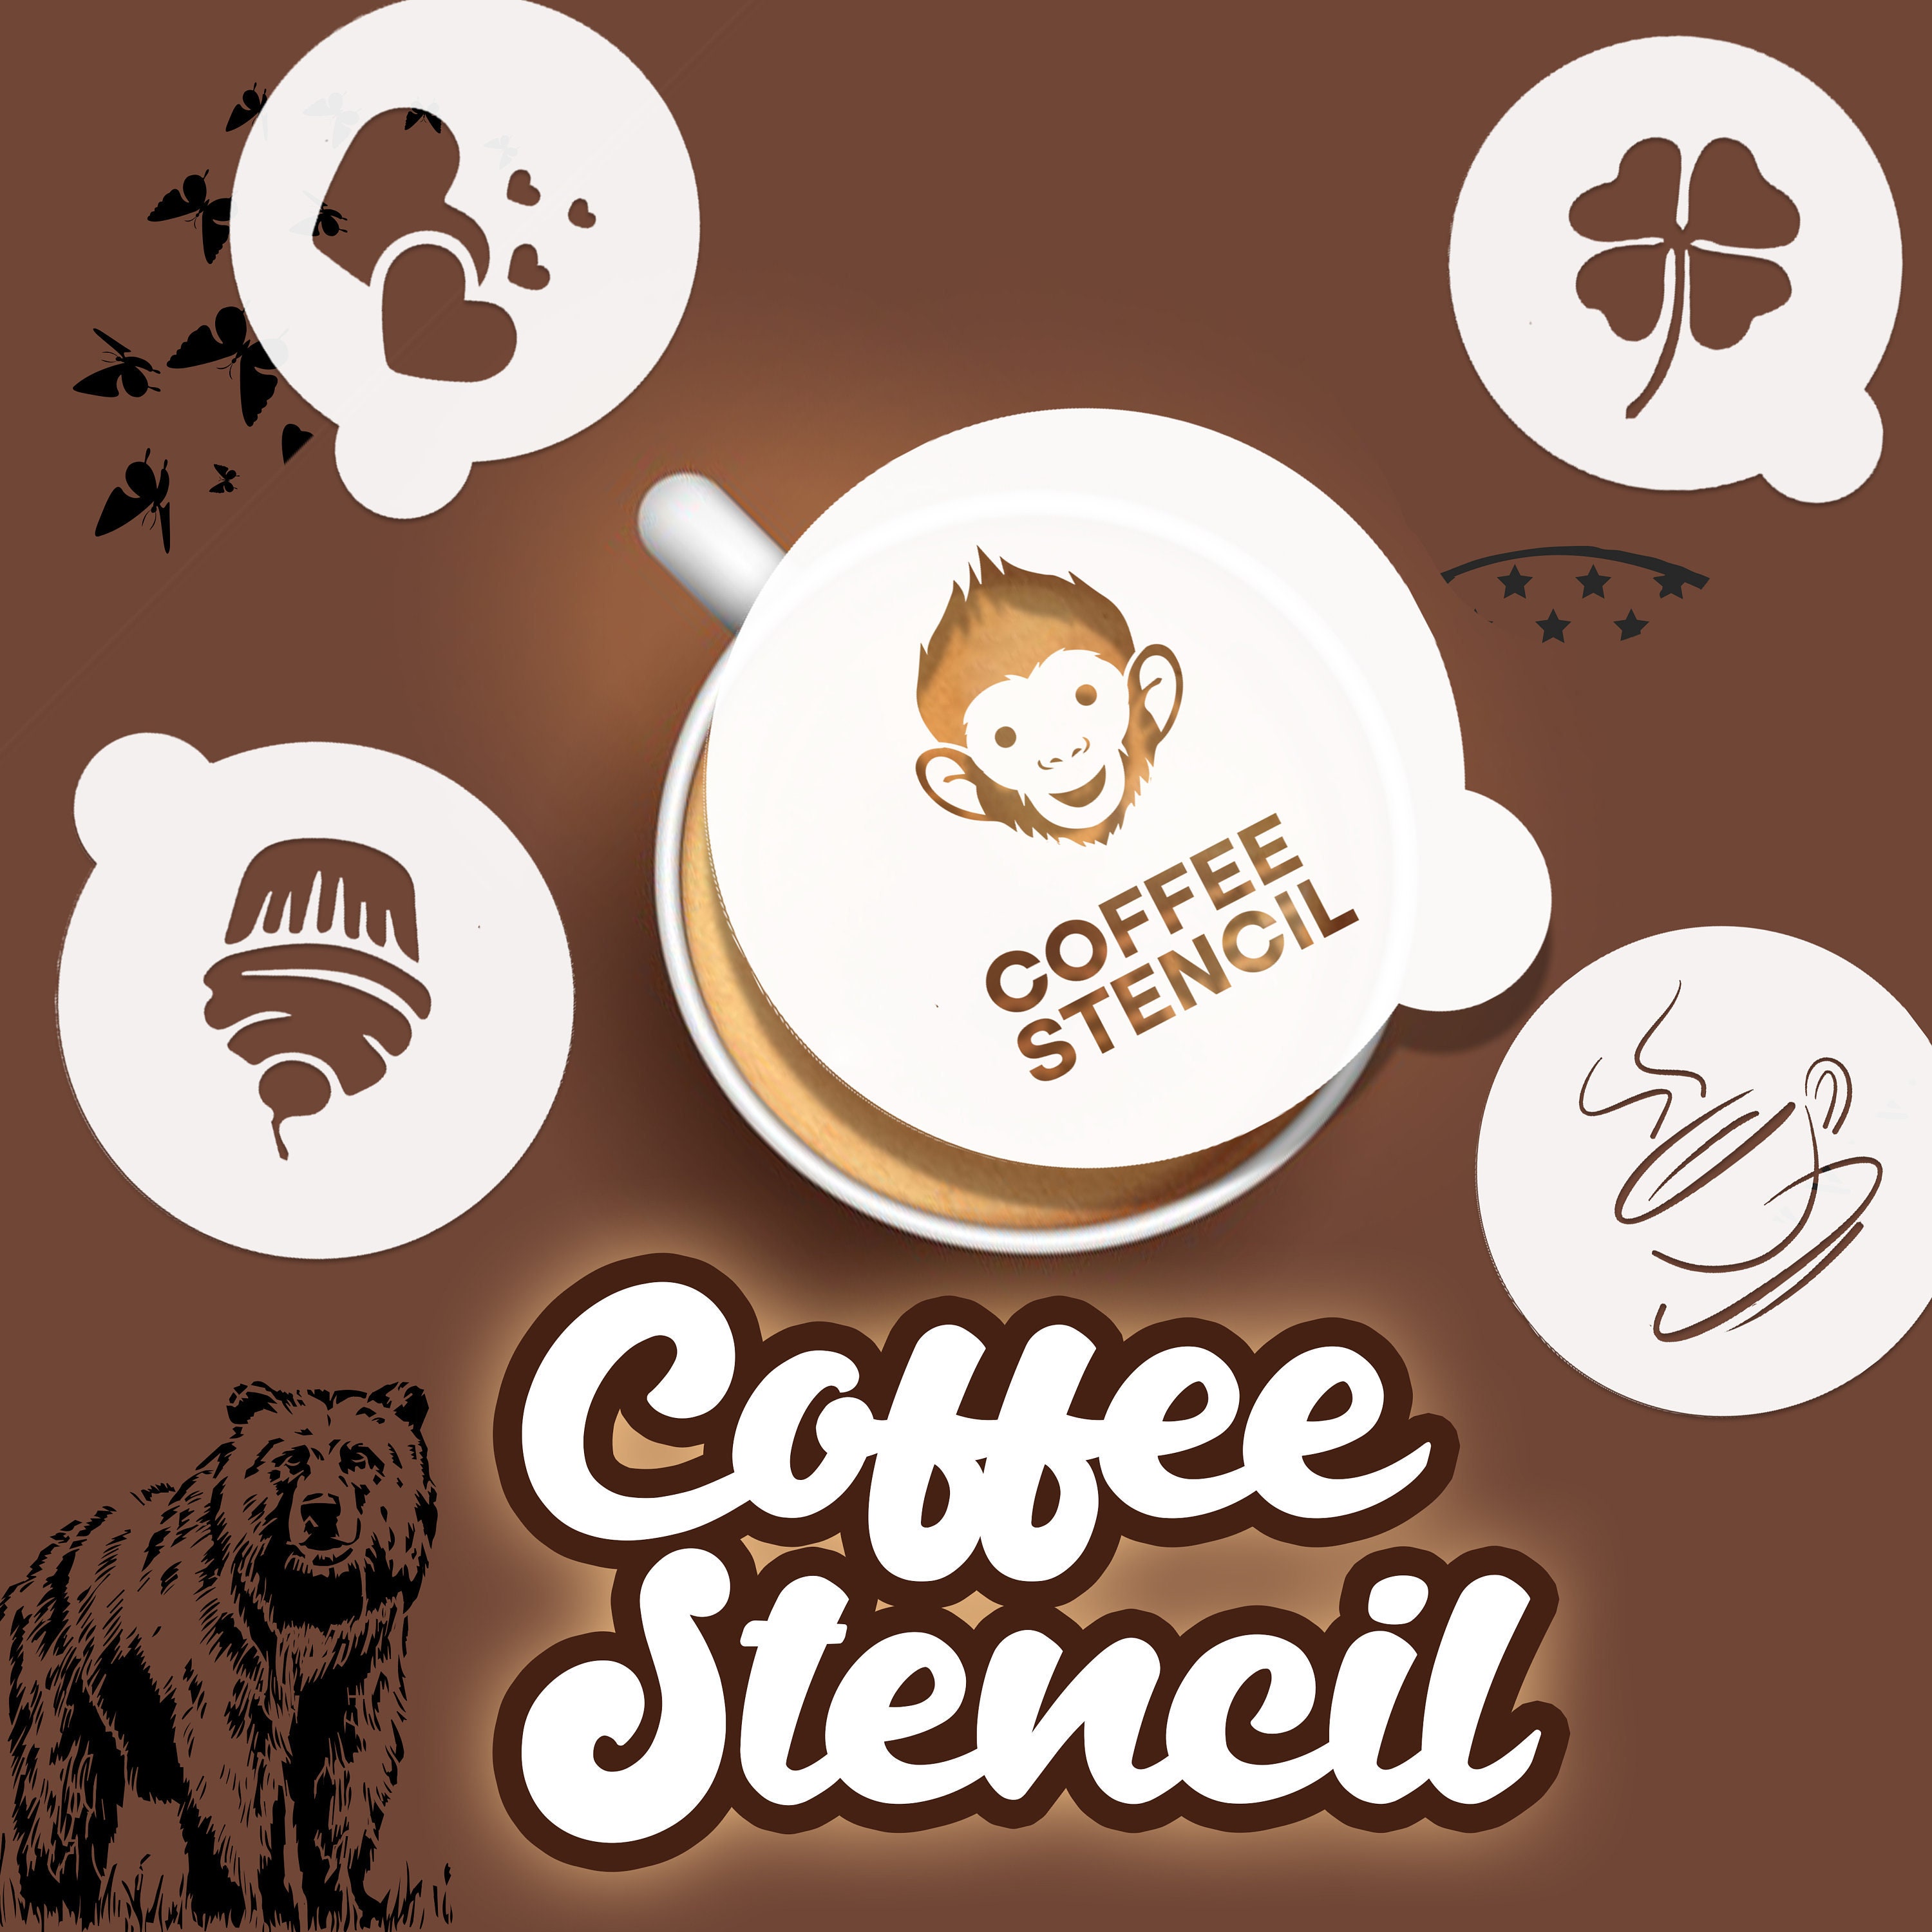 Buy Buytra 60 Pack Barista Coffee Stencils Latte Art Stencils Cappuccino  Stencils Templates for Coffee Decorating, Cookie Icing, Cake, Cupcake Decor